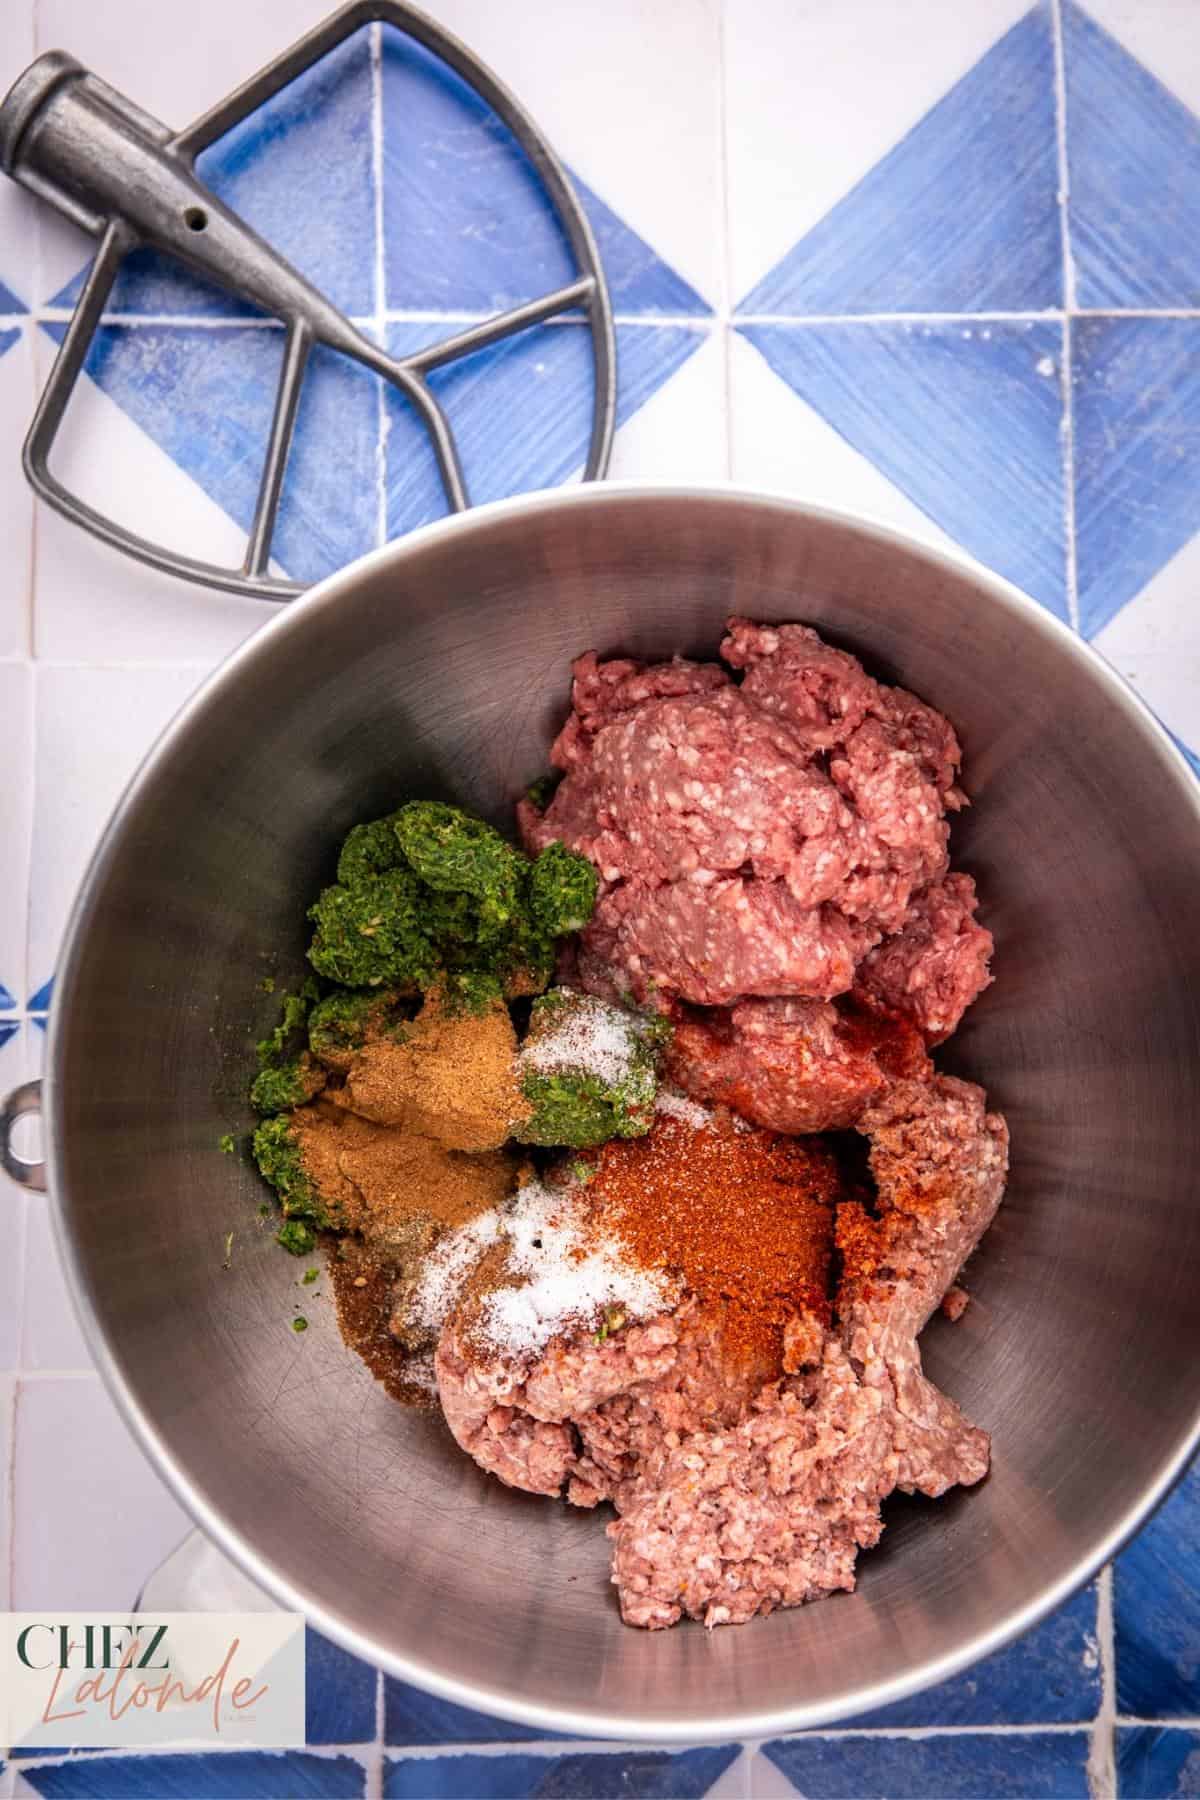 Add a pound of minced beef, lamb, herb paste mixture, and spices into the large mixing bowl using a stand mixer.